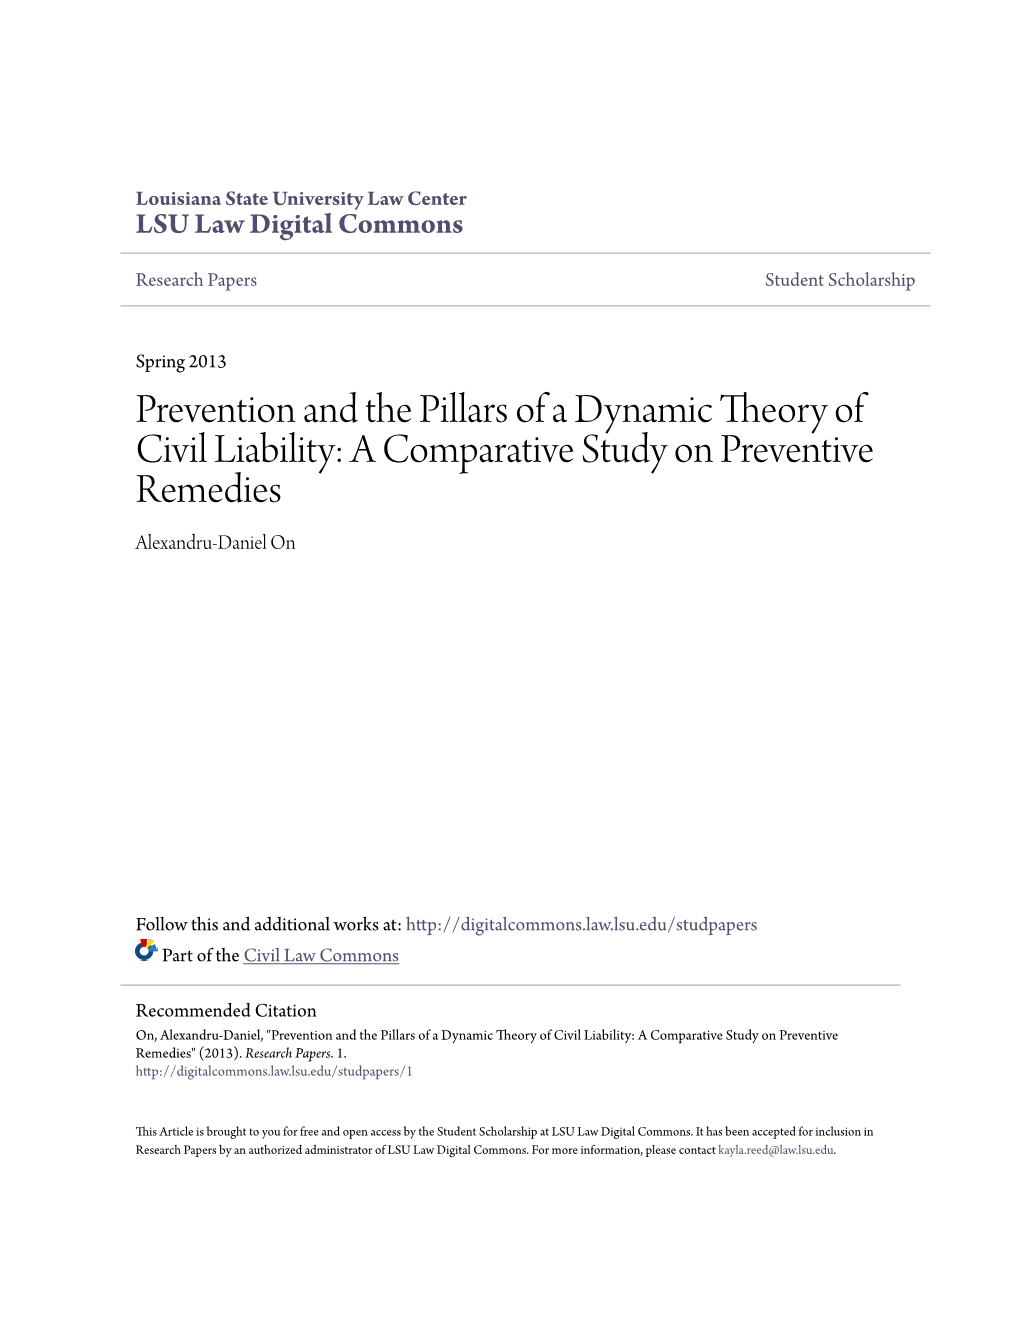 Prevention and the Pillars of a Dynamic Theory of Civil Liability: a Comparative Study on Preventive Remedies Alexandru-Daniel On